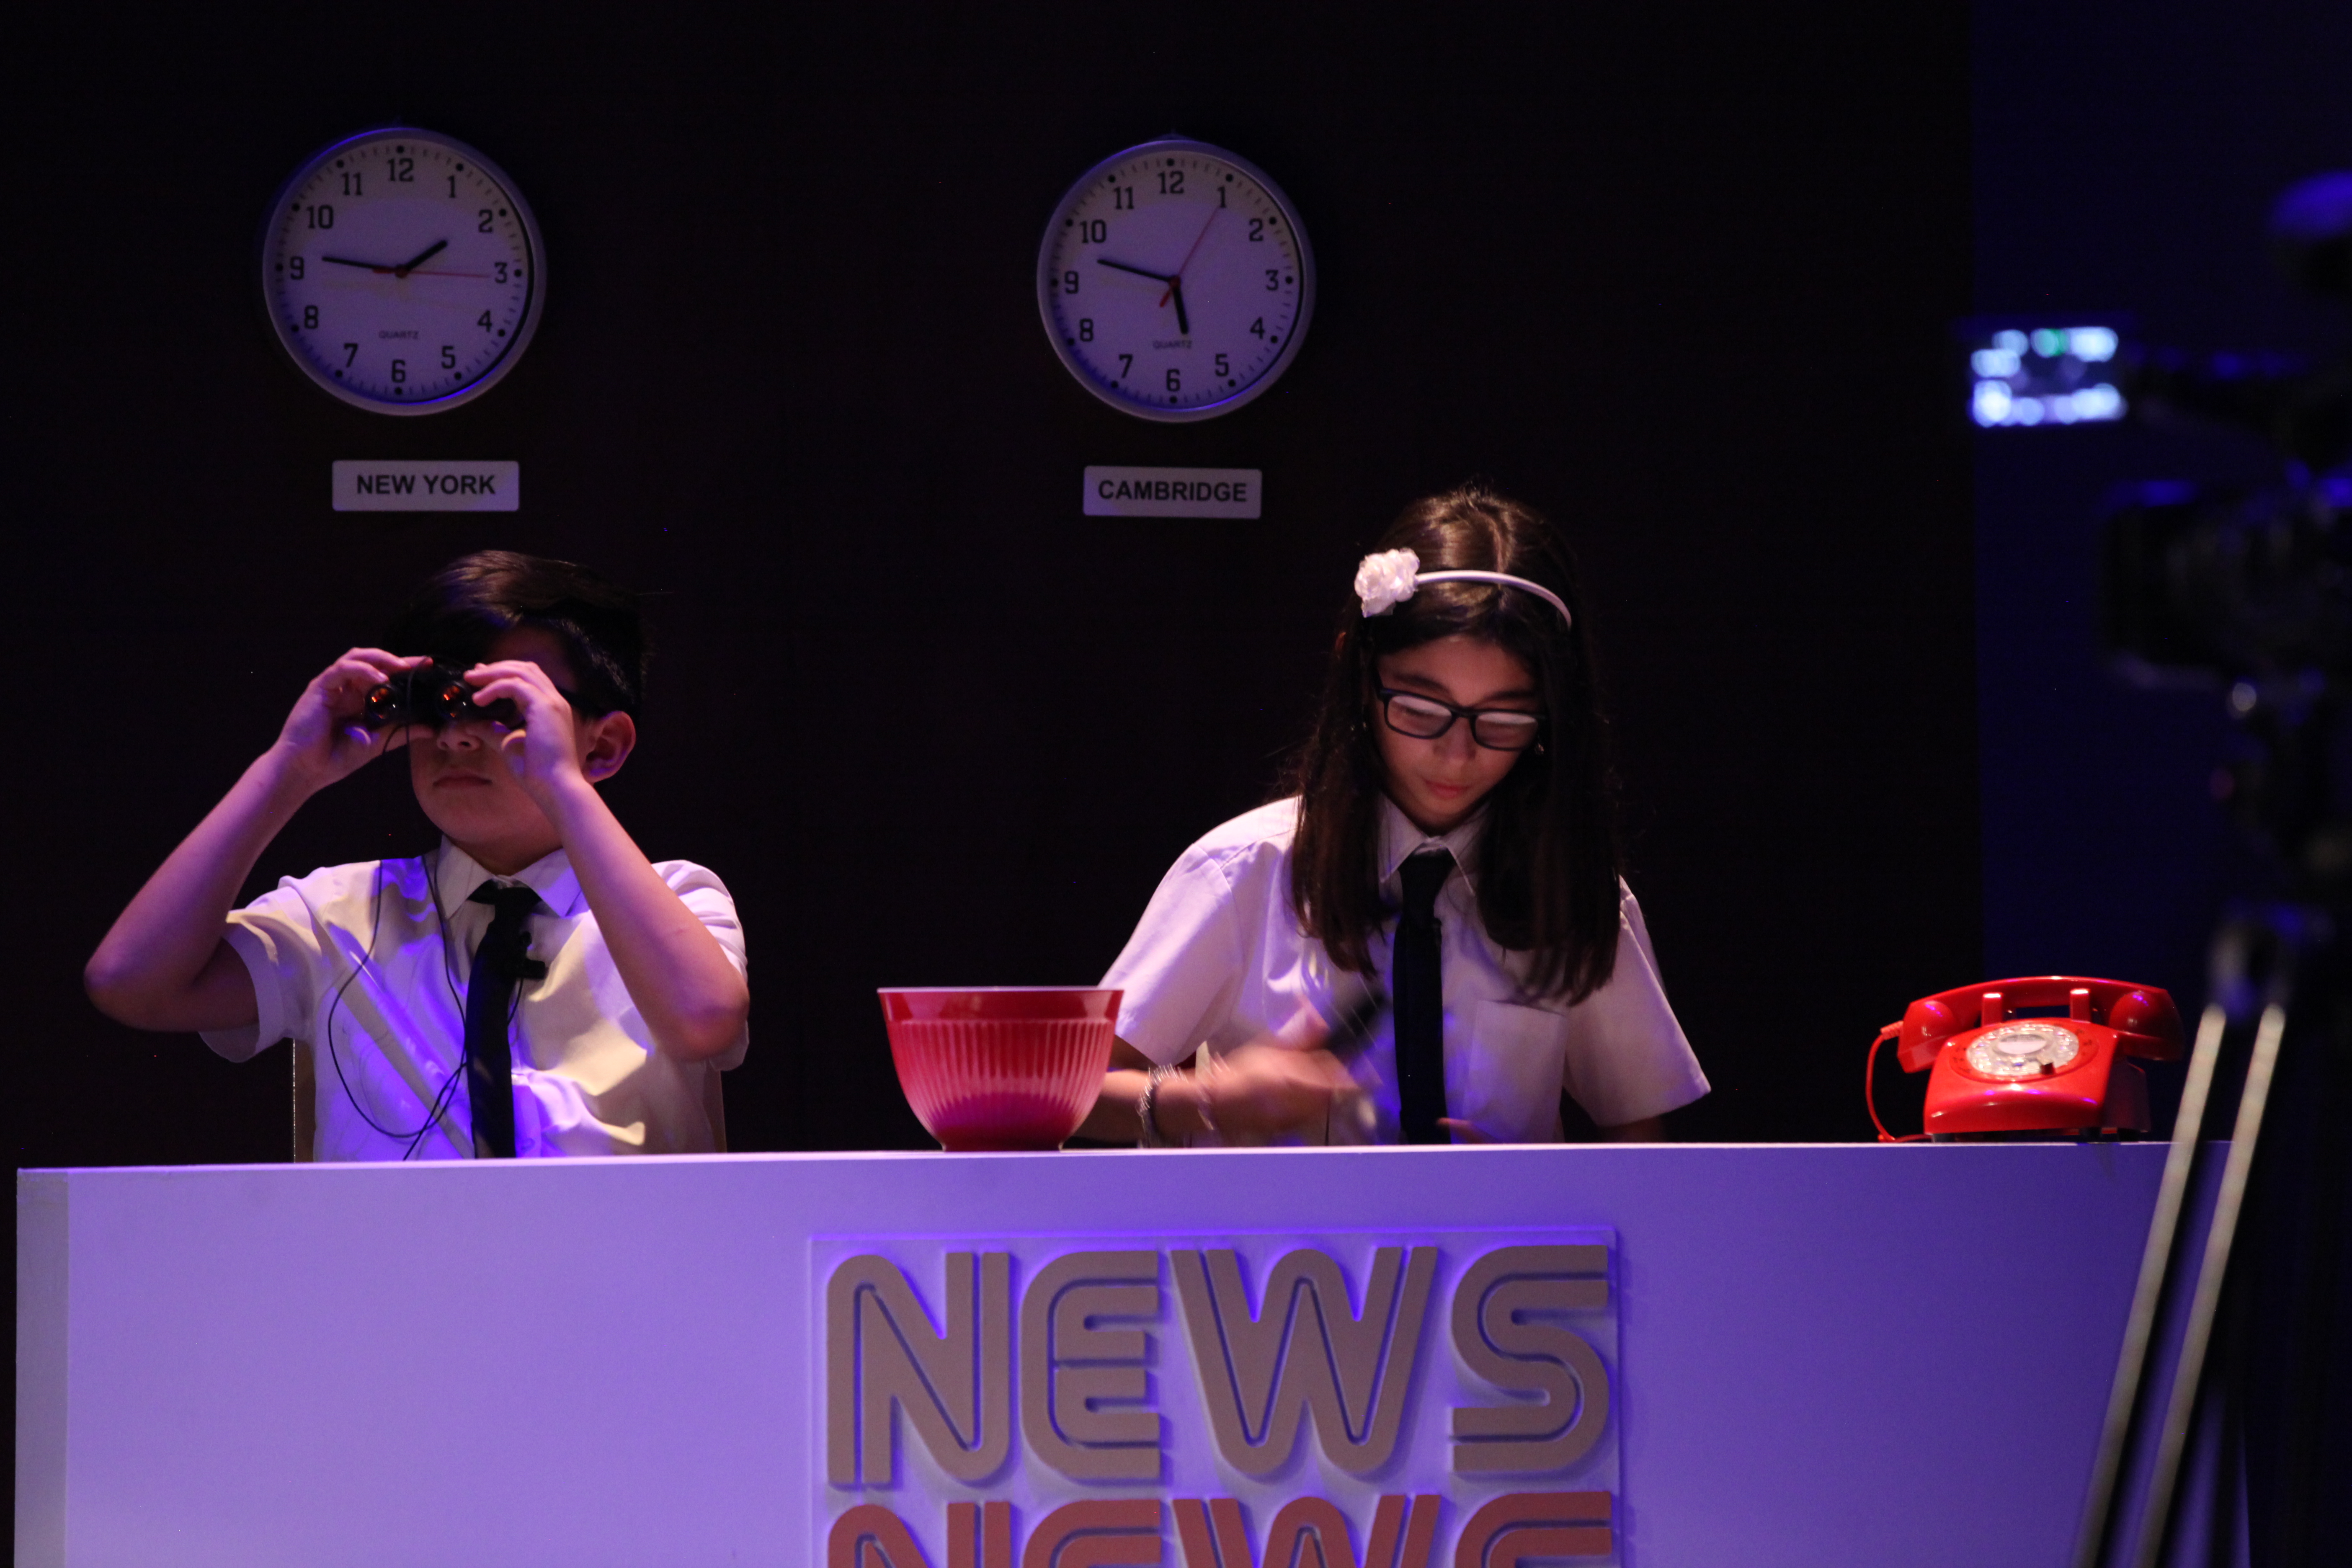 Two children wearing white shirts and black ties, sitting at a news desk